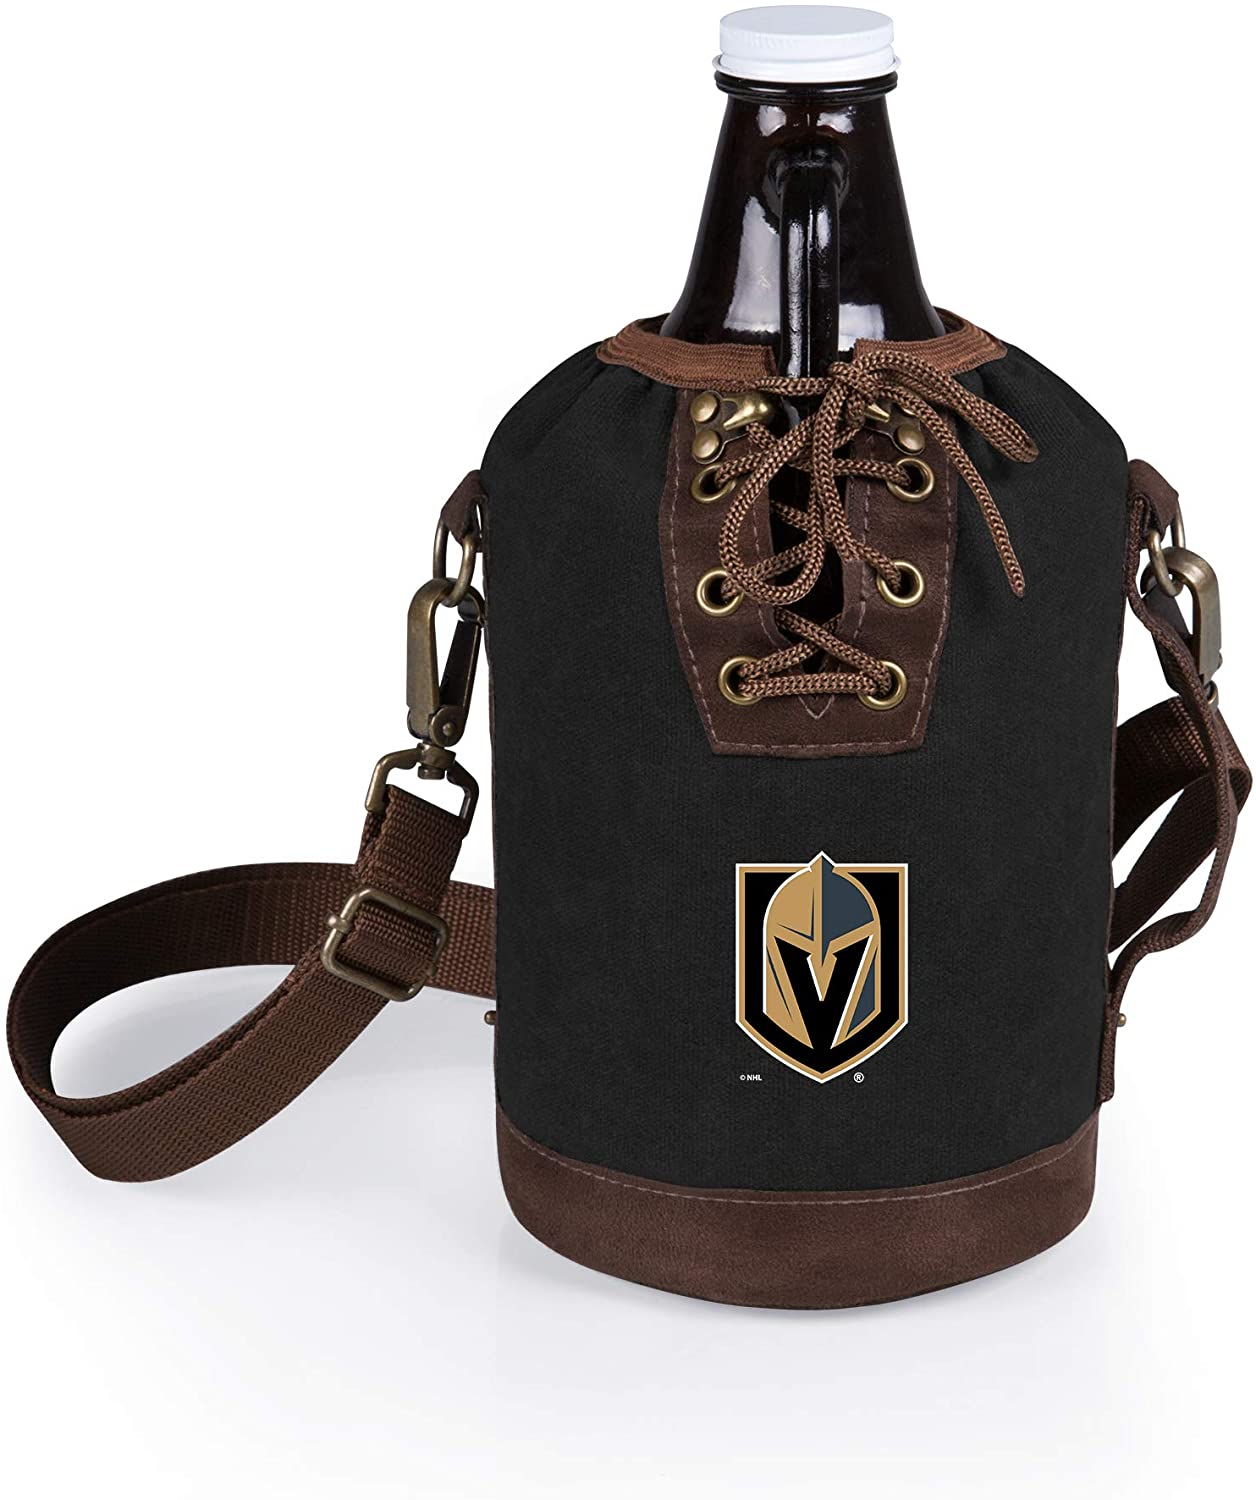 PICNIC TIME NHL Unisex-Adult NHL Insulated Growler Tote with 64 oz. Glass Growler